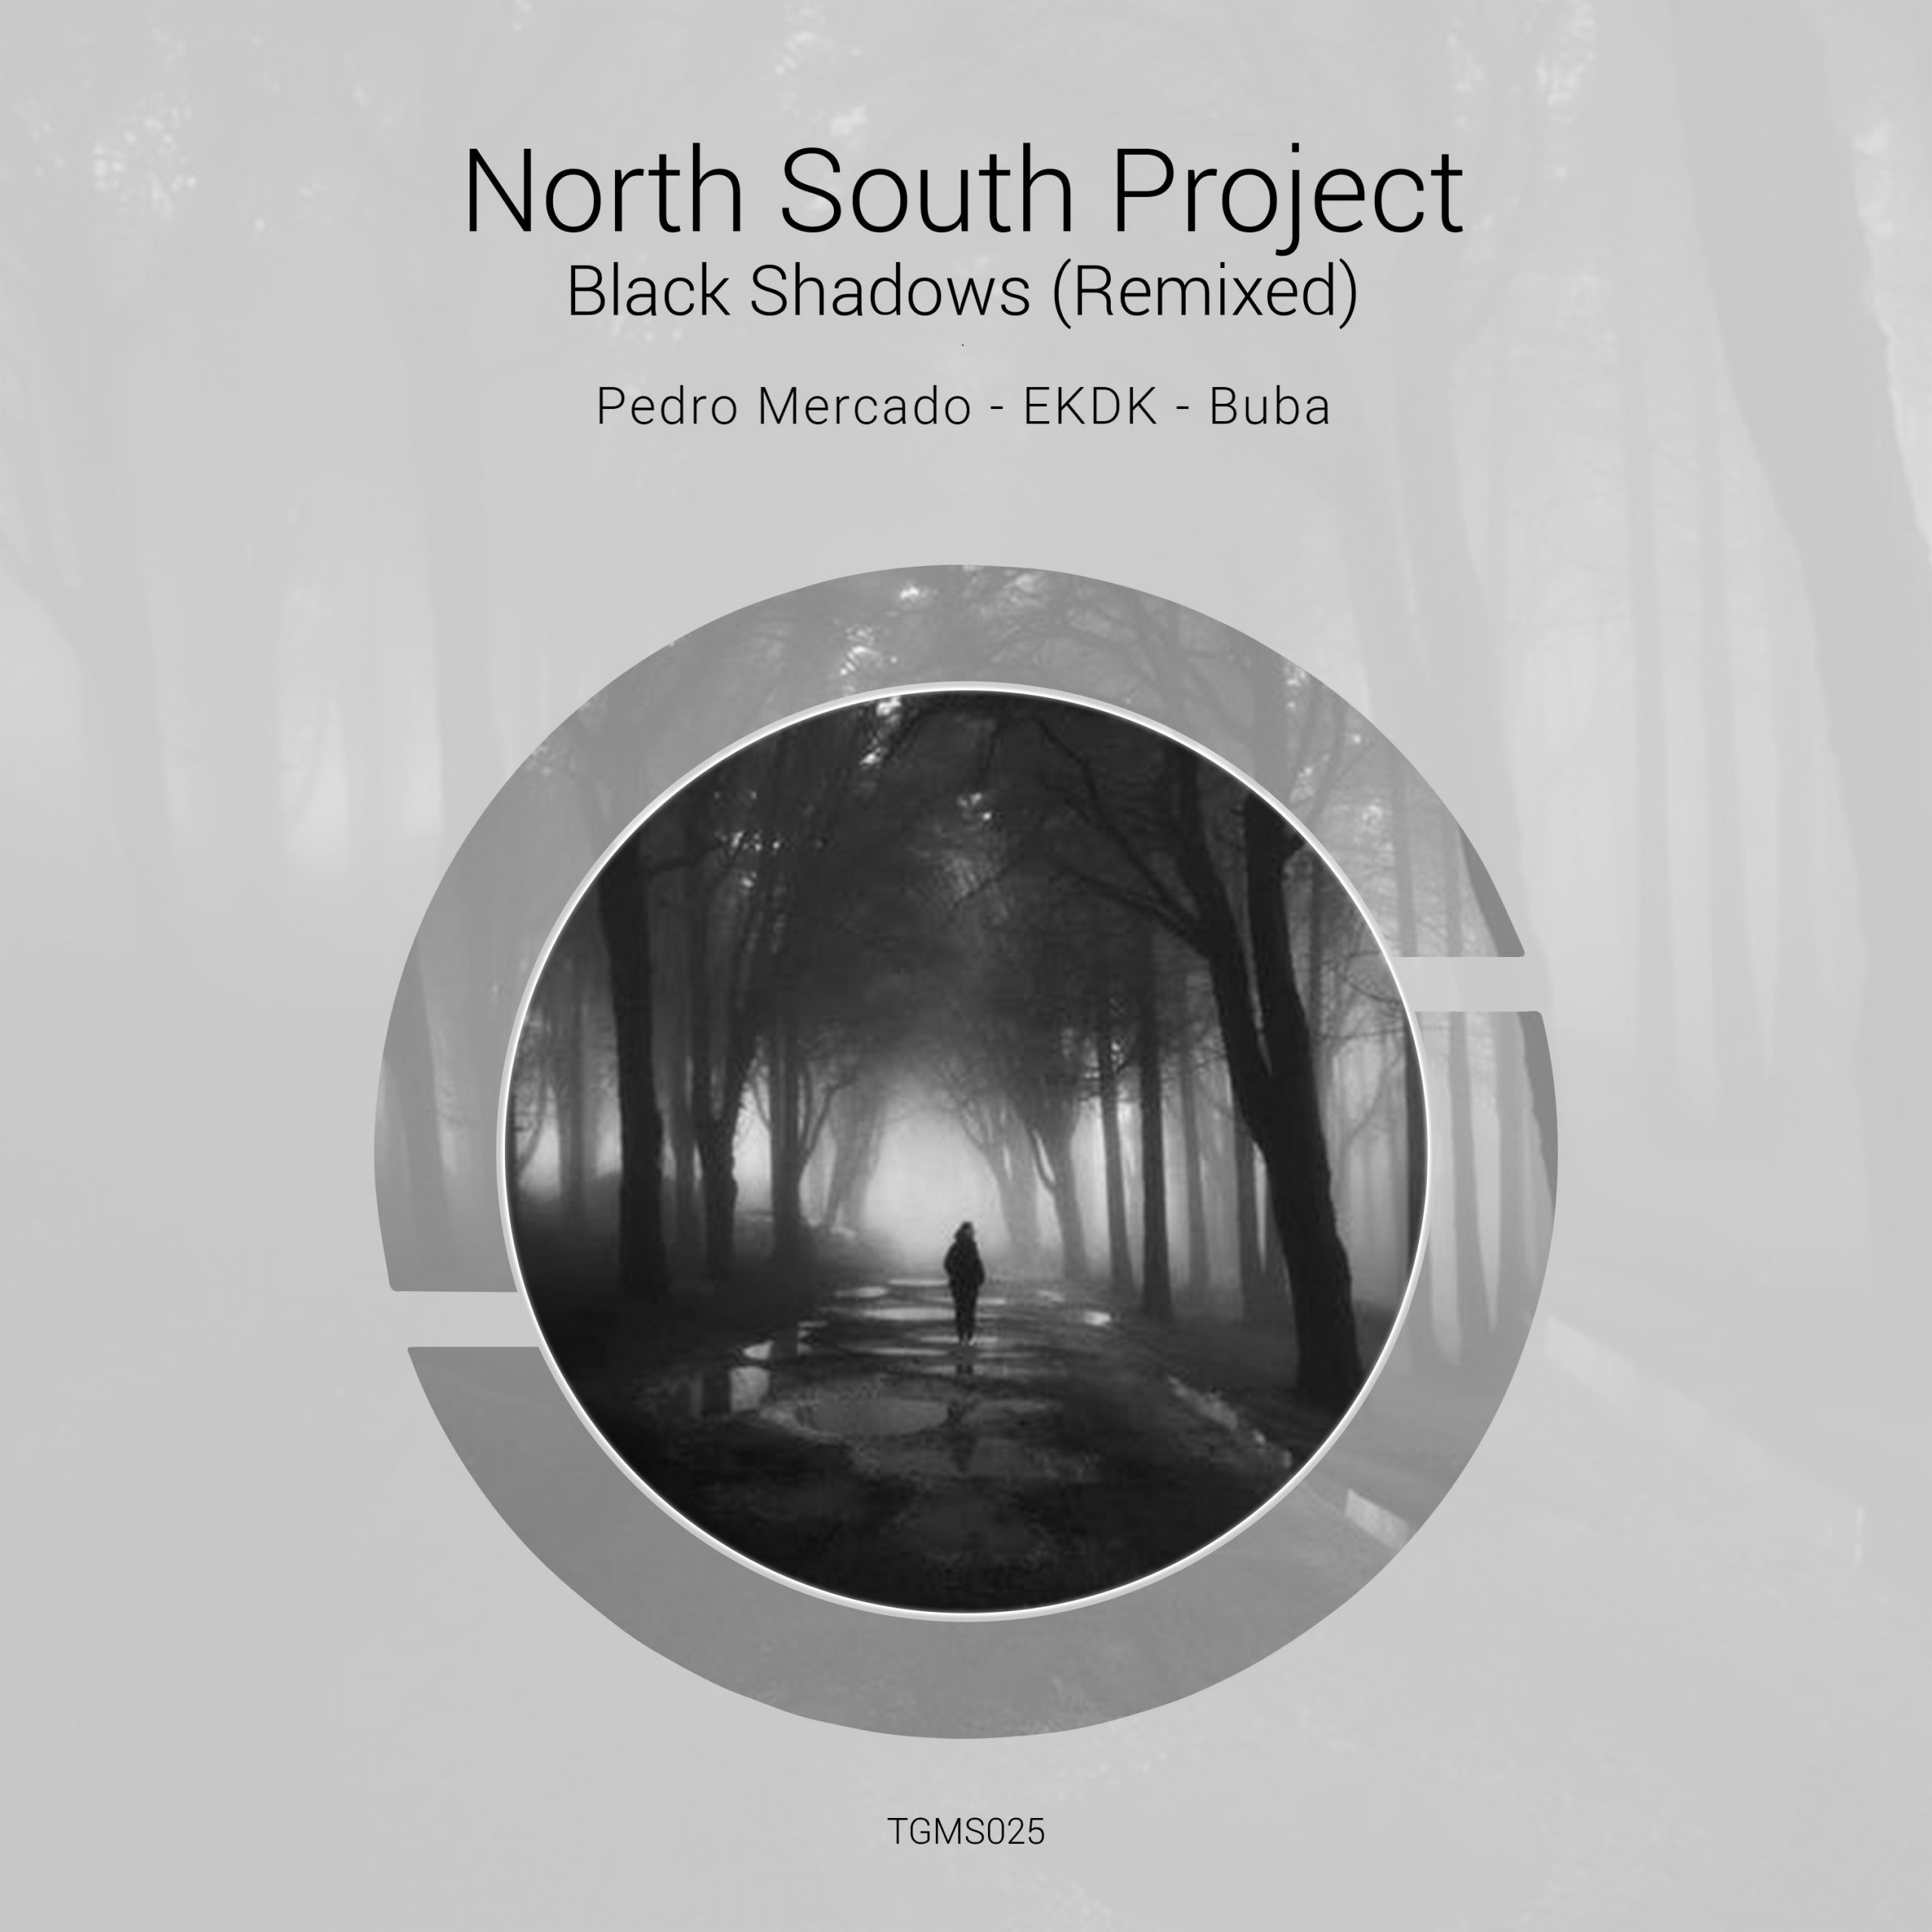 North South Project - Black Shadows (Remixed)